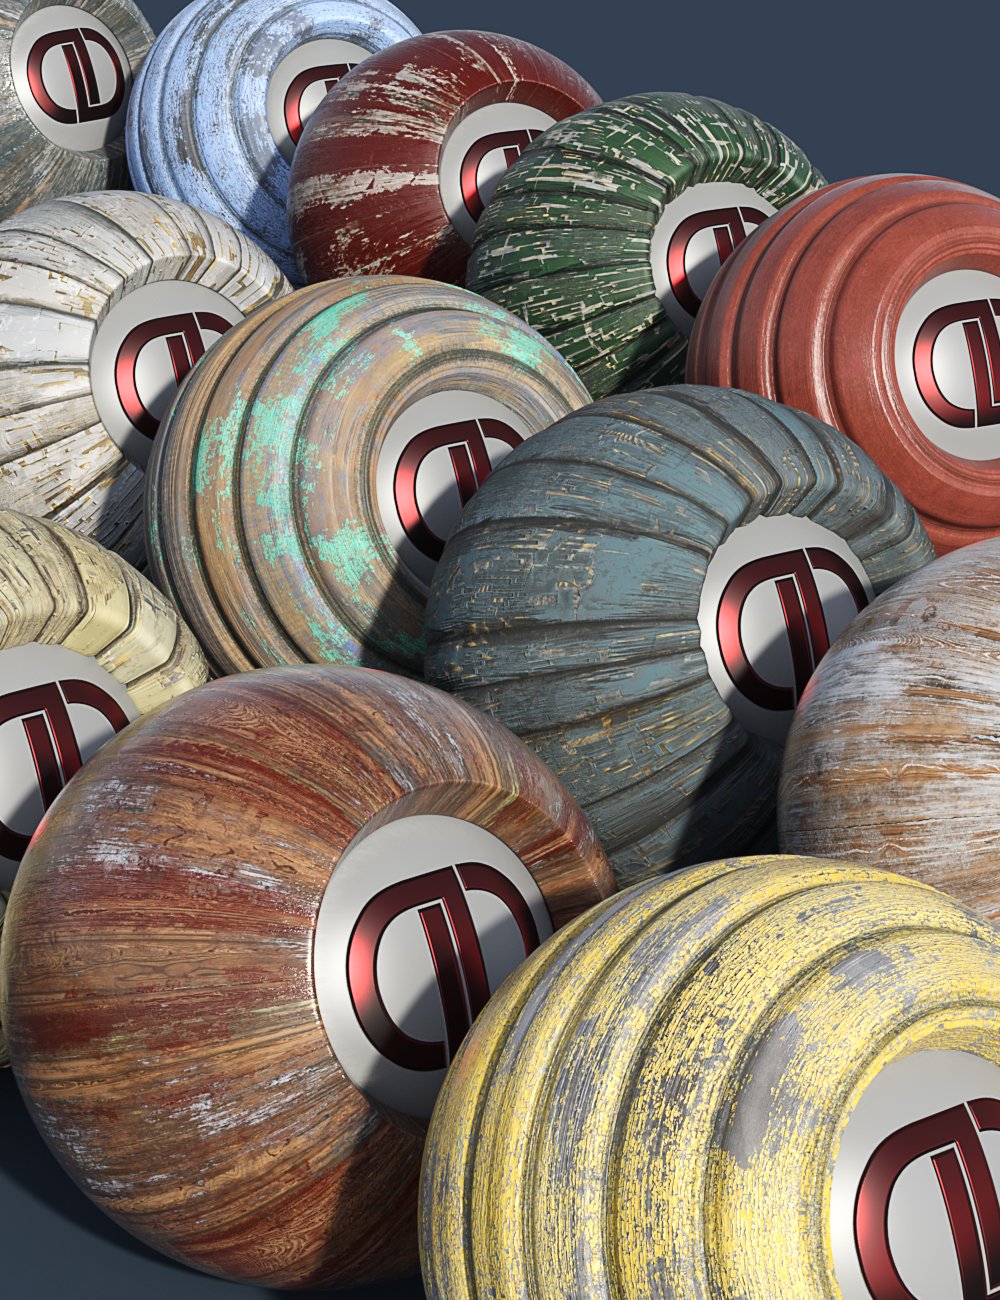 DD PBR Painted Wood Shaders for Iray Vol 2 by: Digital Delirium, 3D Models by Daz 3D